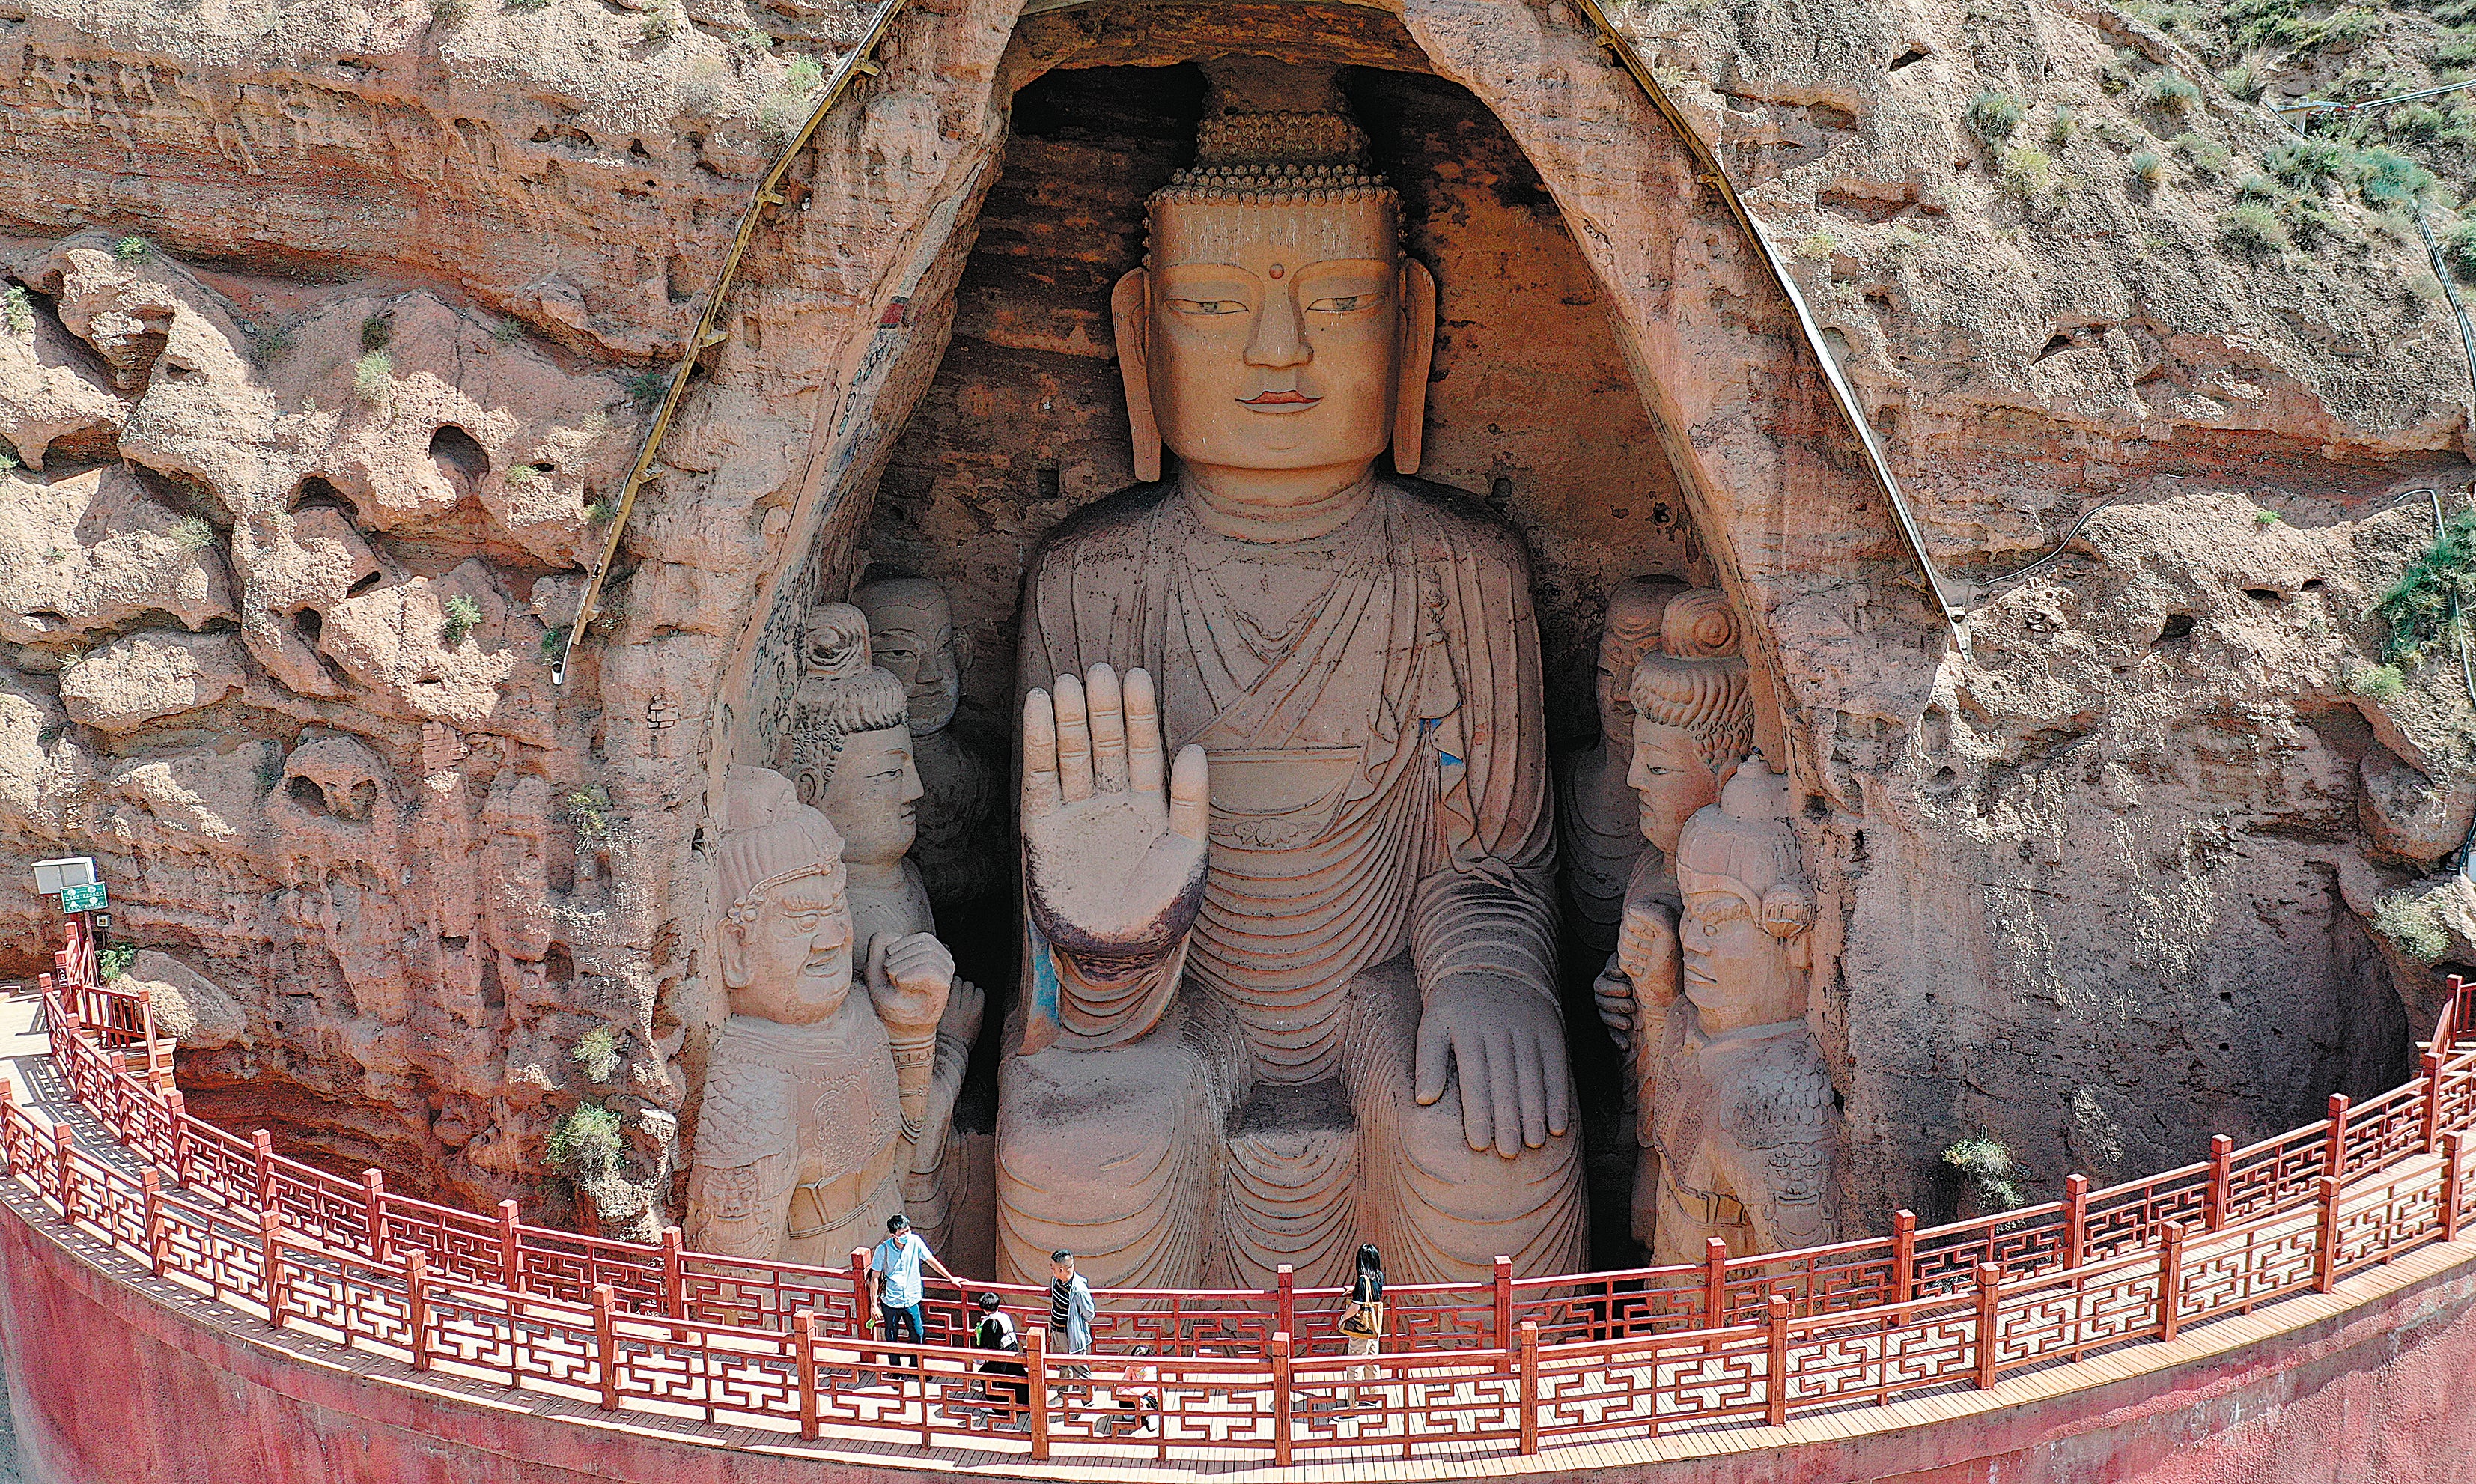 The 1,600-year-old Tiantishan Grottoes in Wuwei, Gansu province